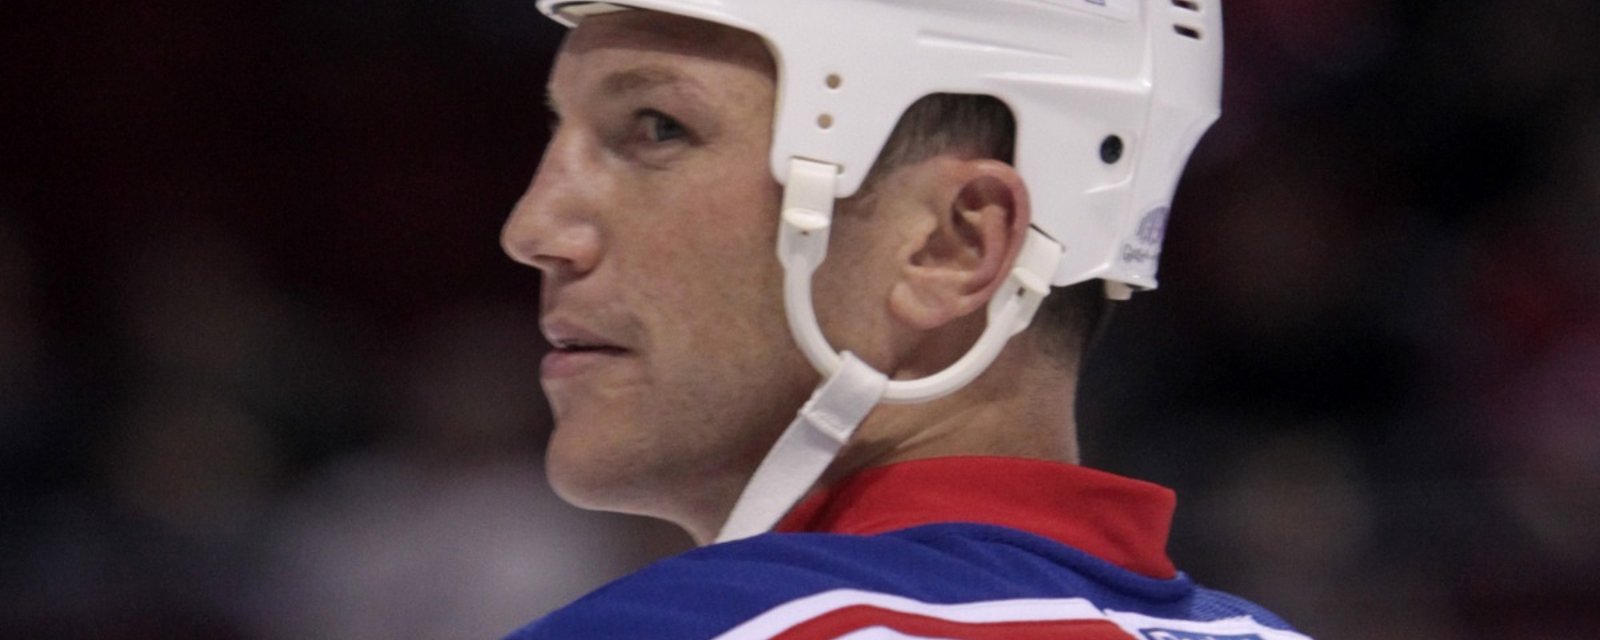 Sean Avery auditions for Mike Milbury's job.